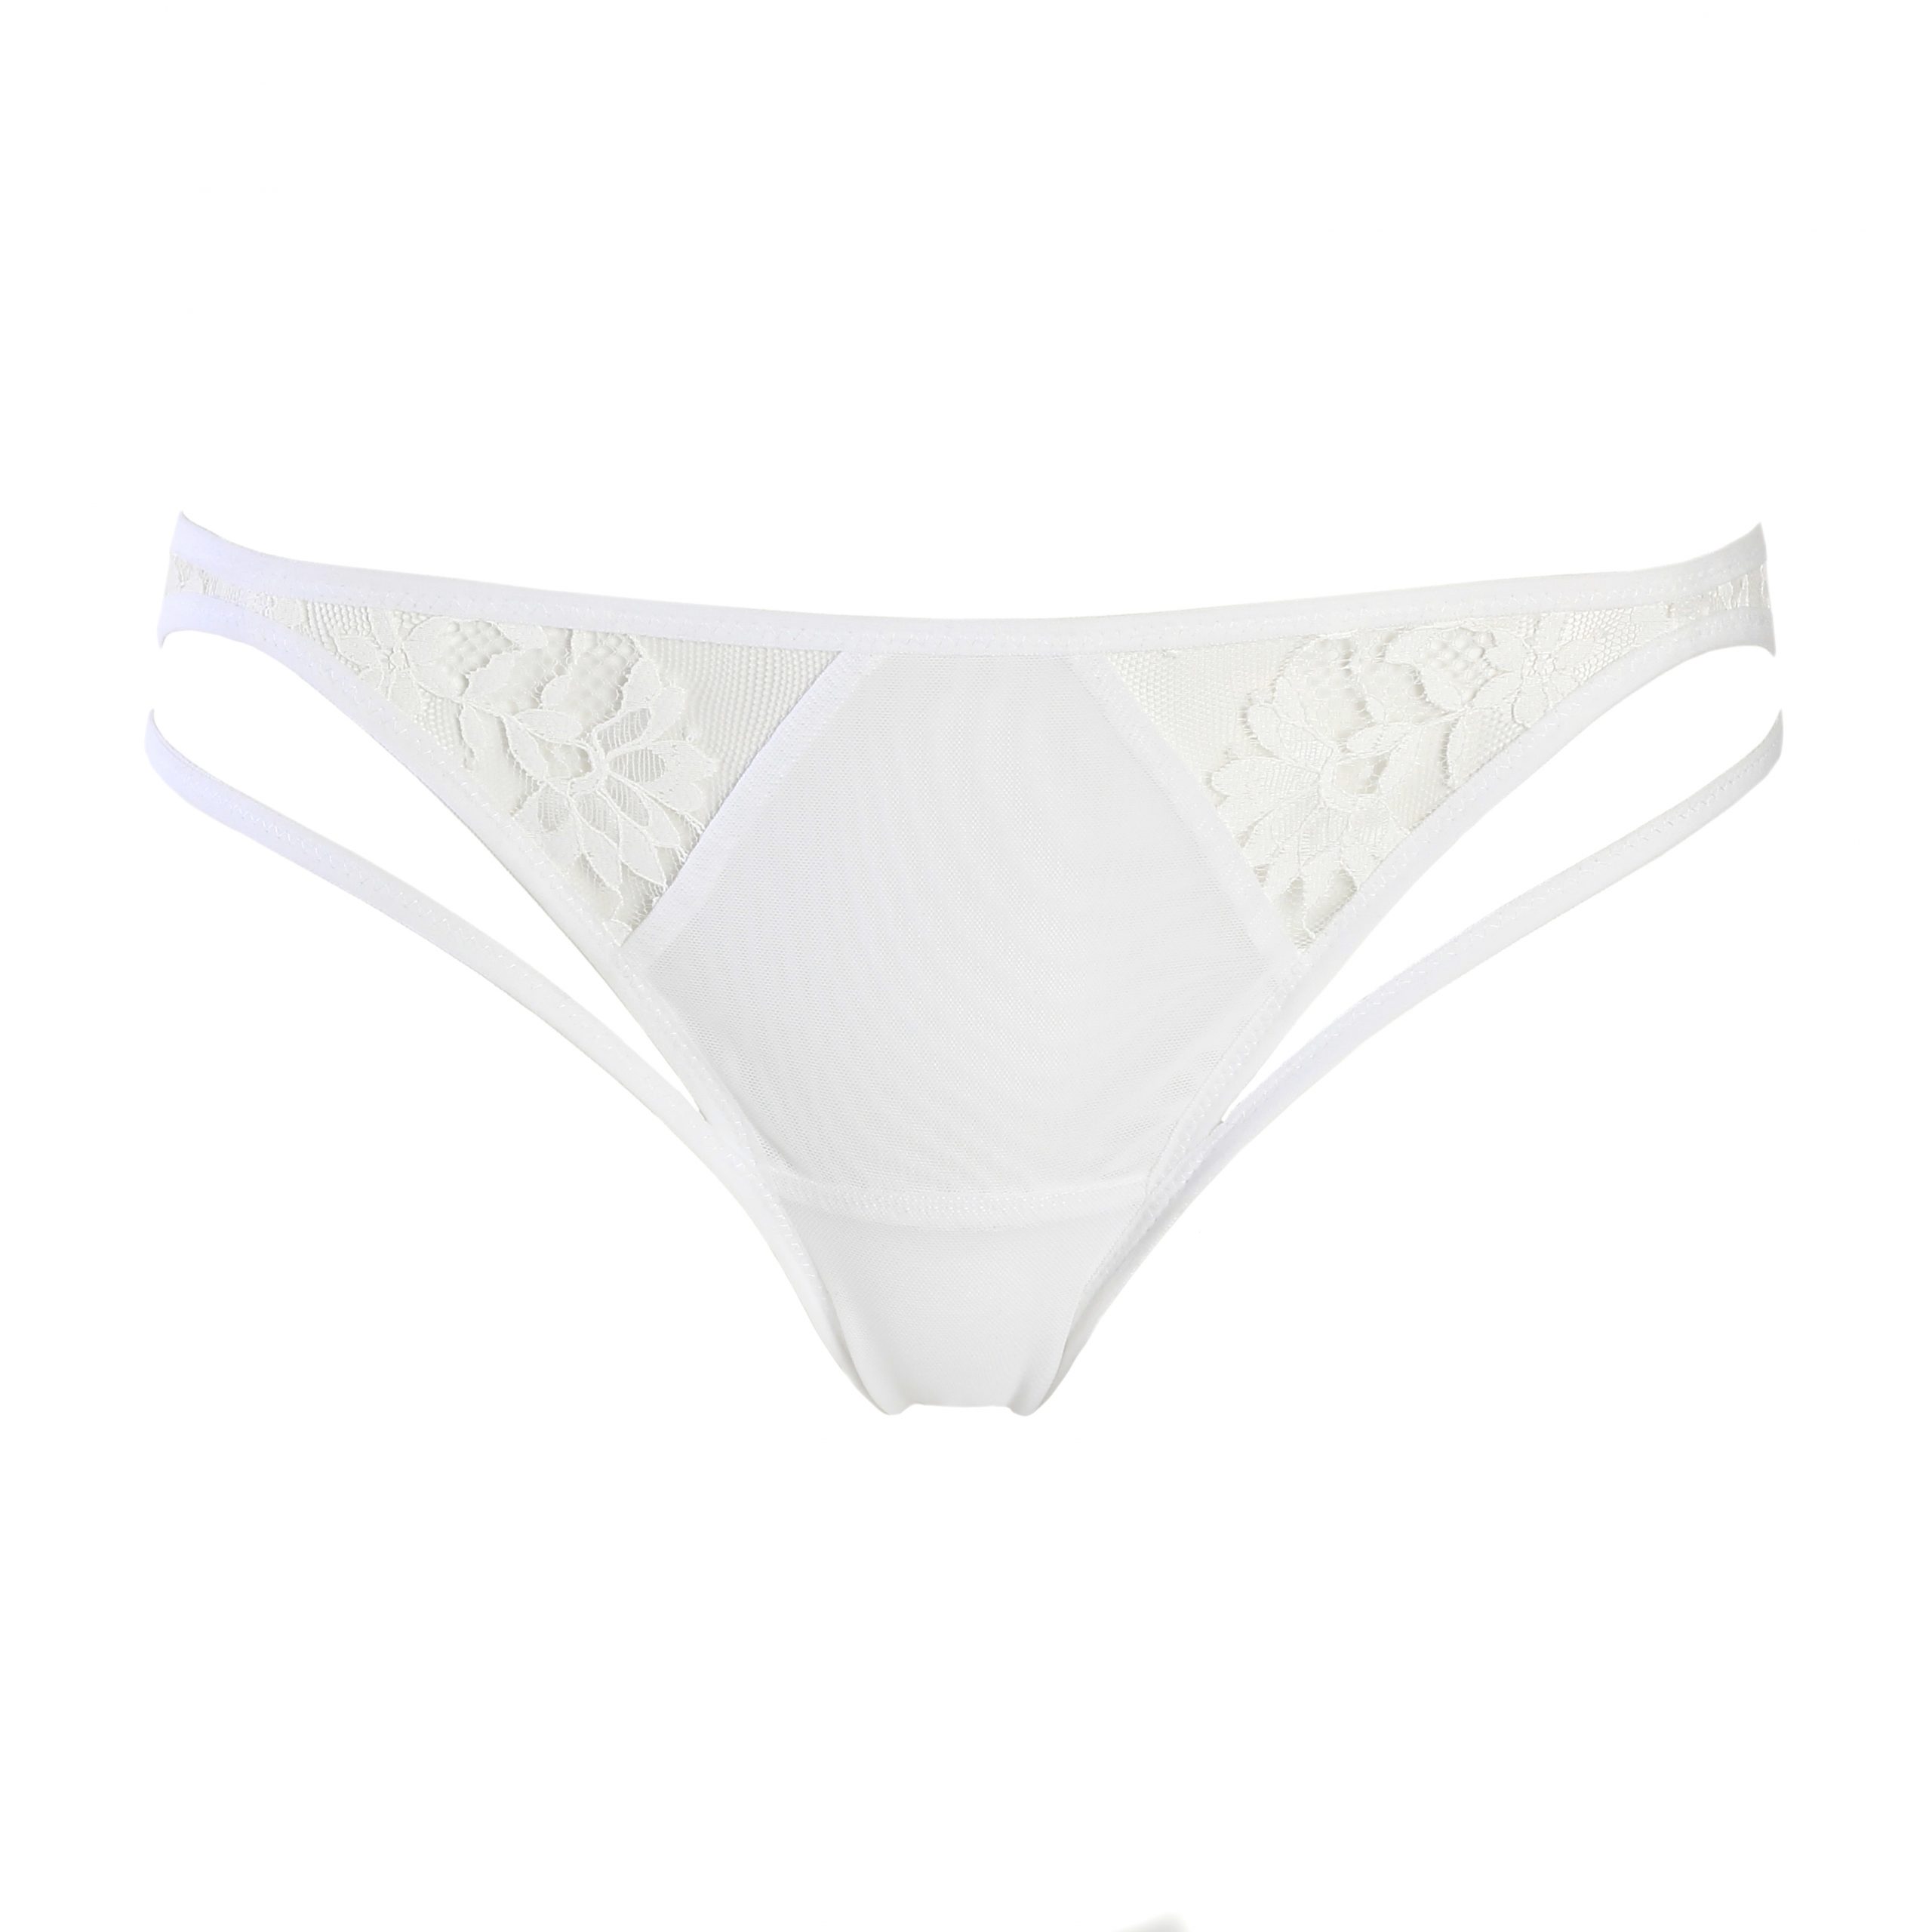 https://flashyouandme.com/wp-content/uploads/2018/09/White-Mesh-Panties-with-Lace-by-flashyouandme.com_-scaled.jpg